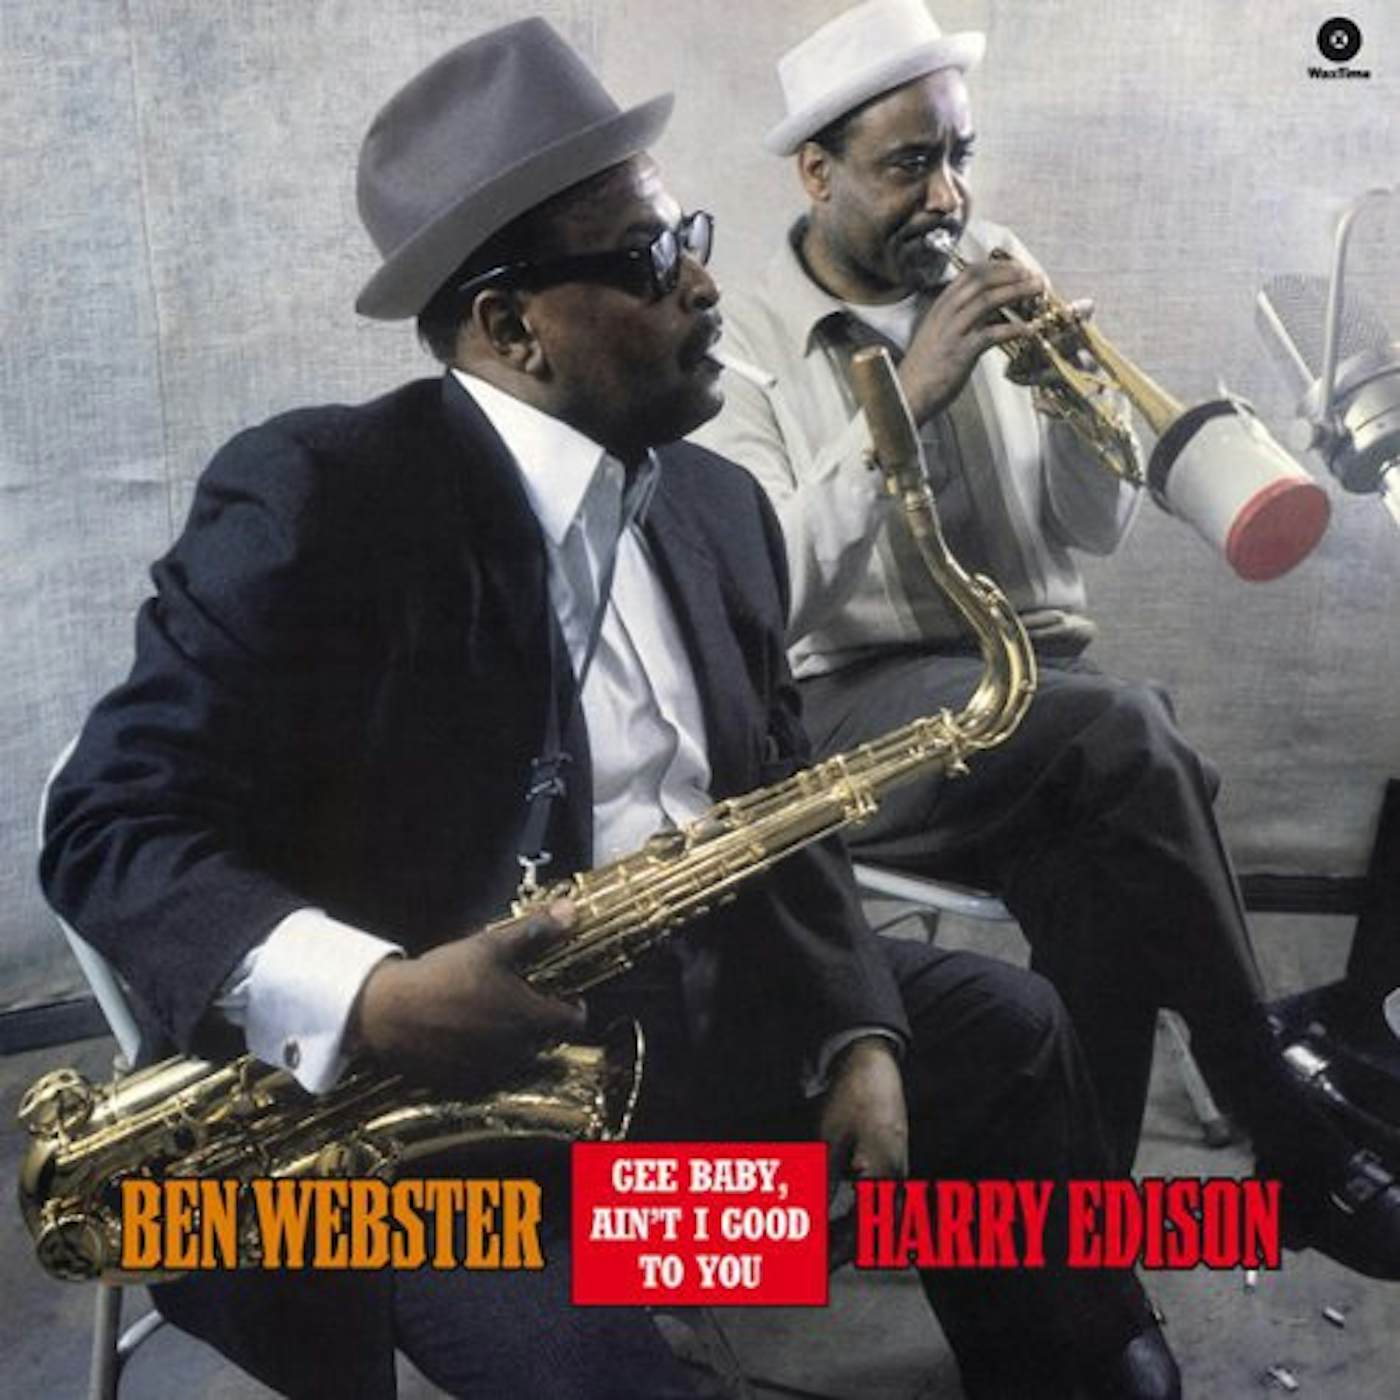 Ben Webster & Harry Edison GEE BABY AIN'T I GOOD TO YOU Vinyl Record - 180 Gram Pressing